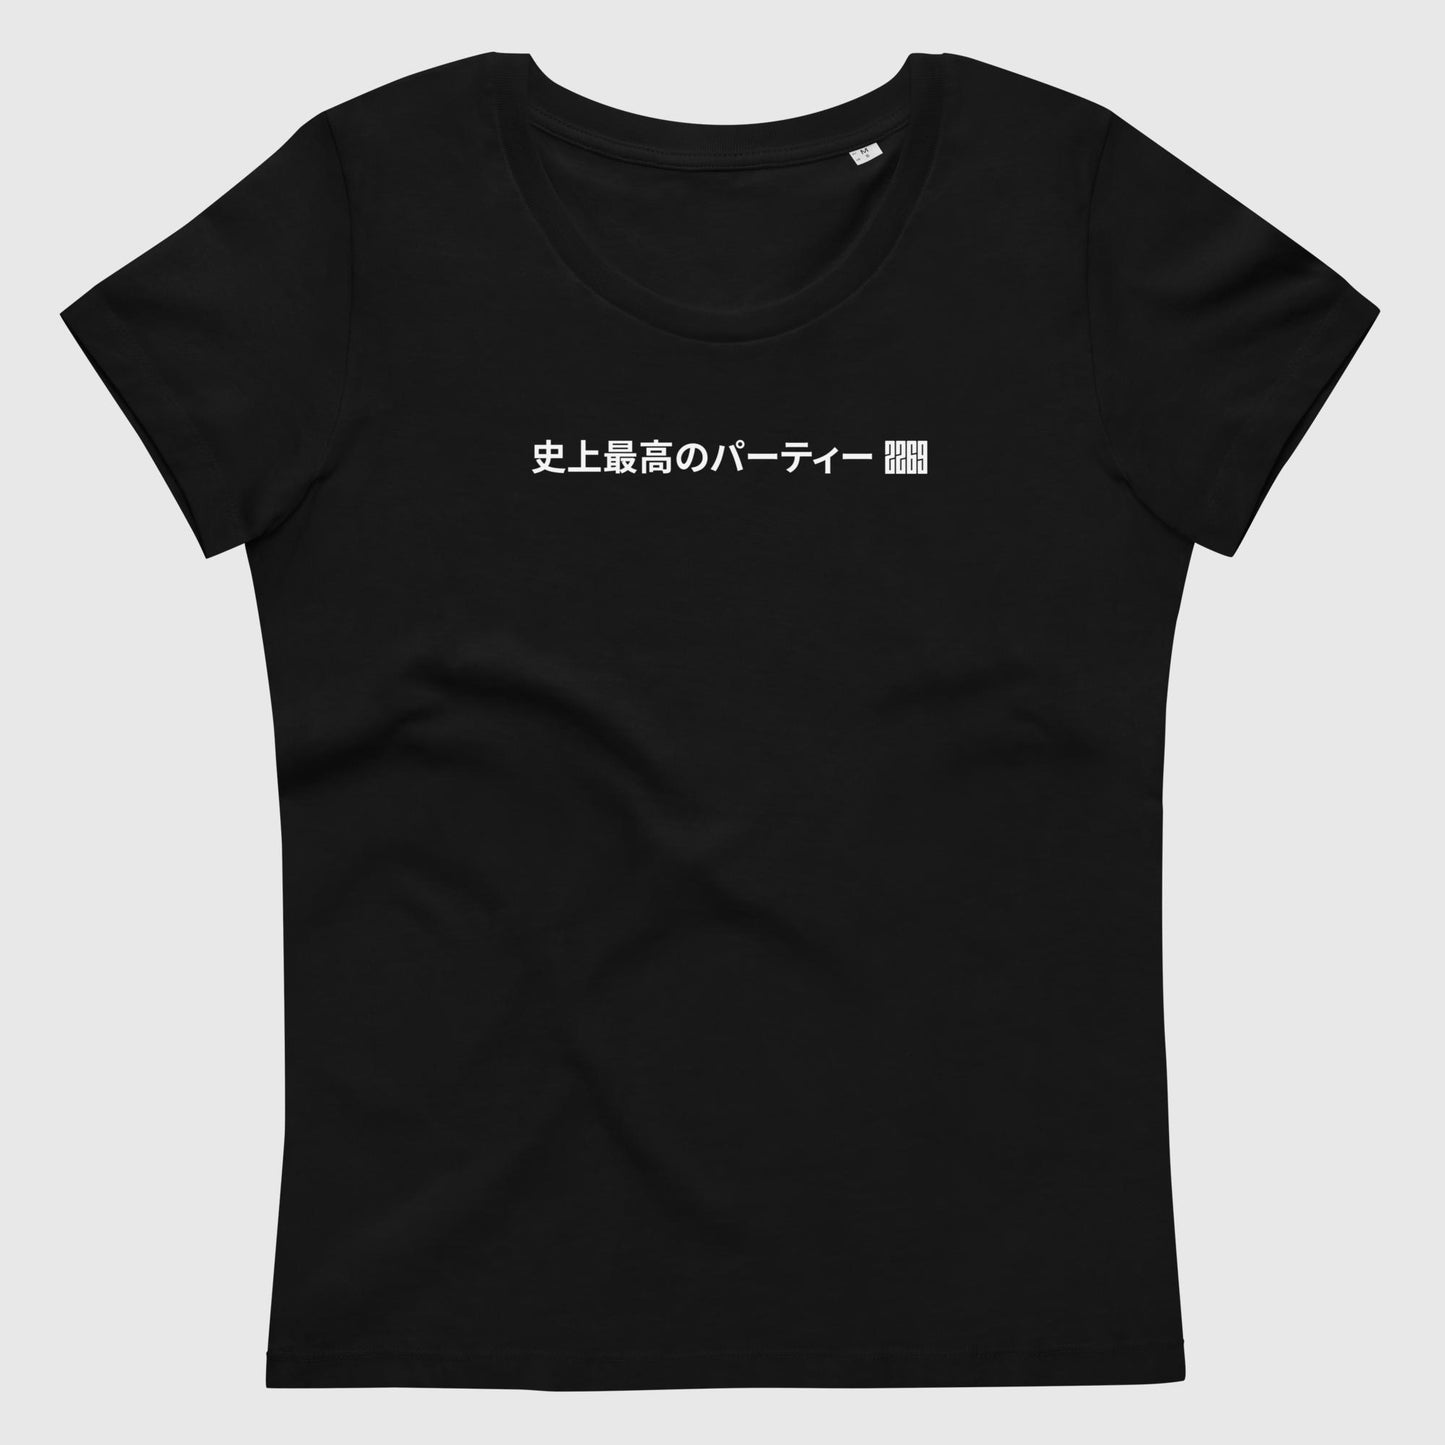 Women's black fitted organic cotton t-shirt with Japanese 2269 party message